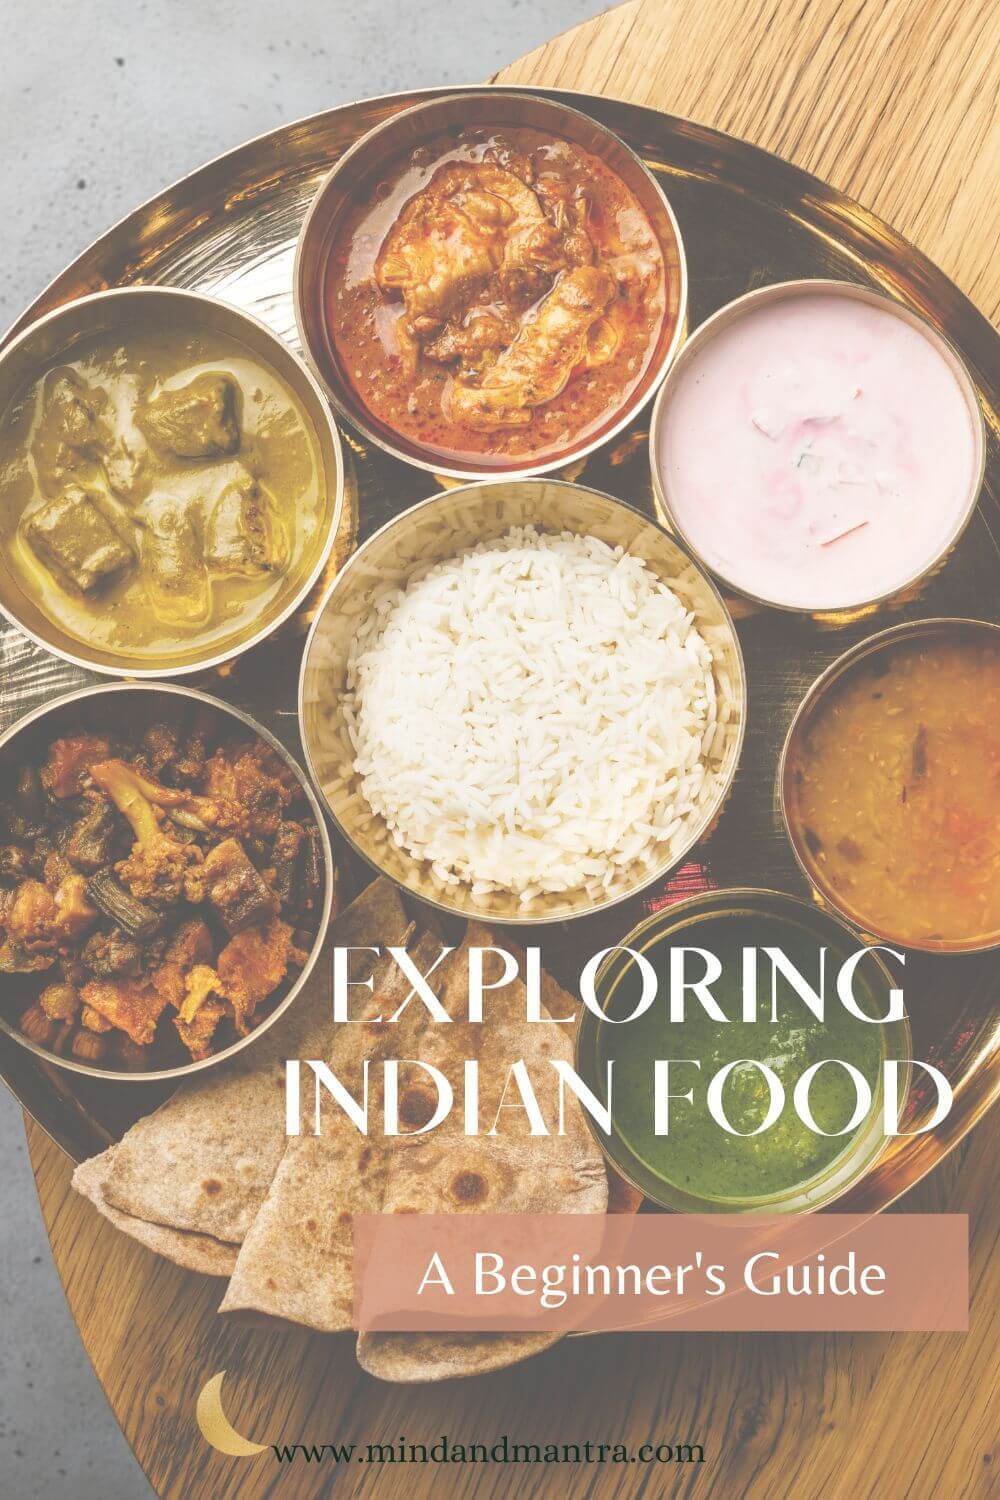 A Beginners Guide to Indian Food (2).jpg